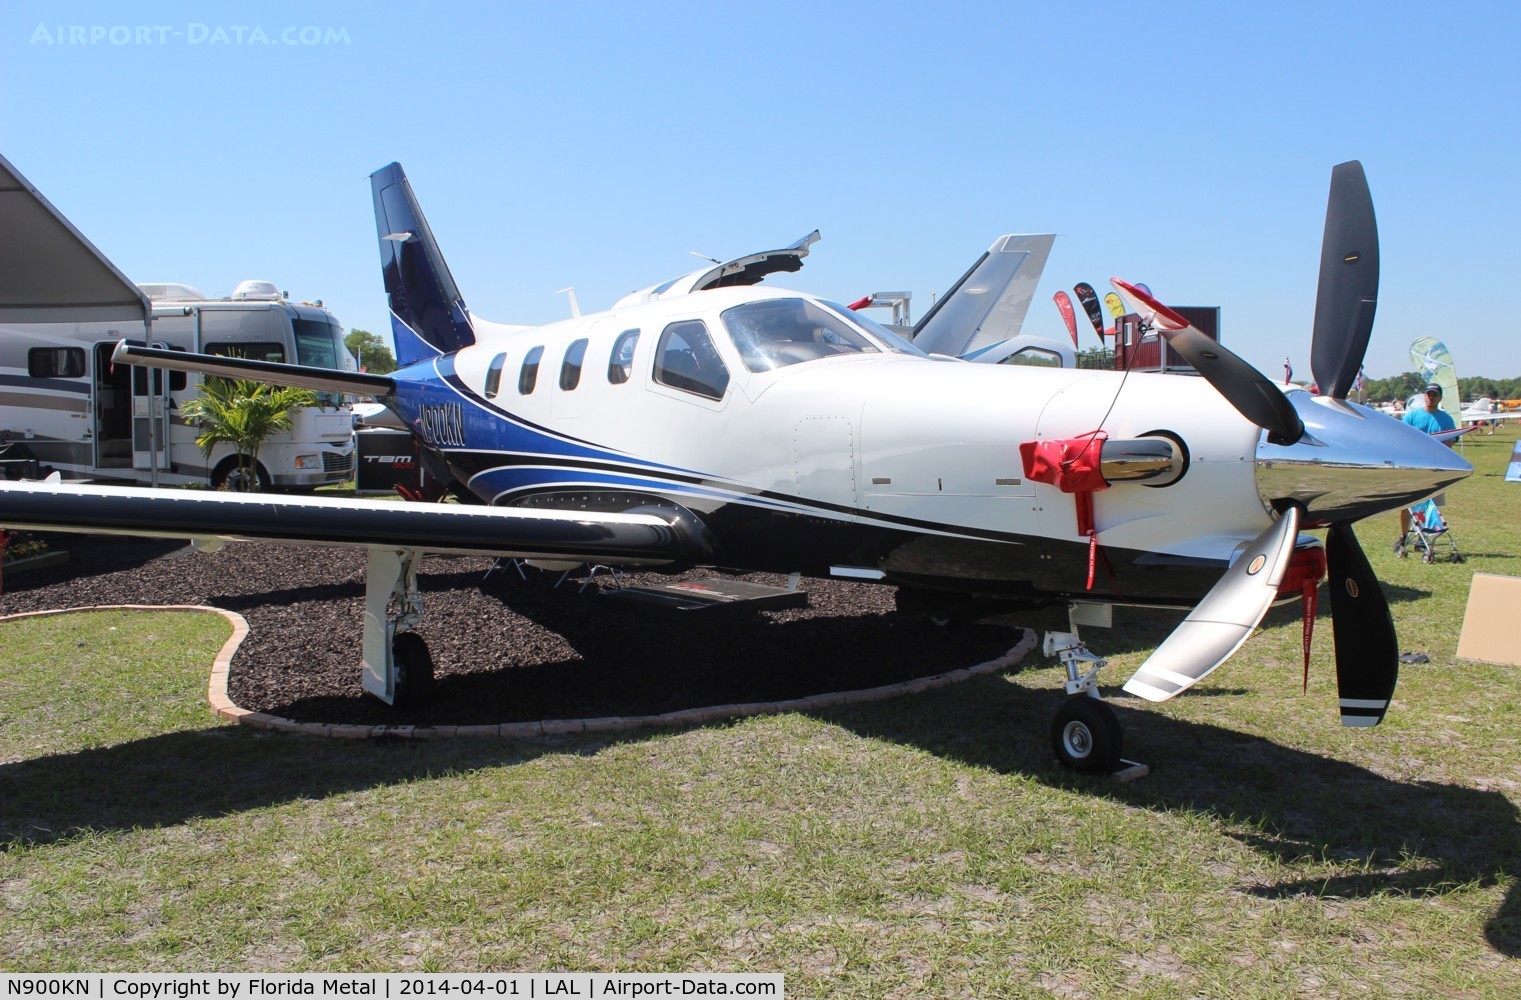 N900KN, 2014 Socata TBM-900 C/N 1003, This TBM-900 crashed back in September and made headlines when it depressurized over Florida, flying over Cuba before crashing north of Jamaica - 2 fatalities.